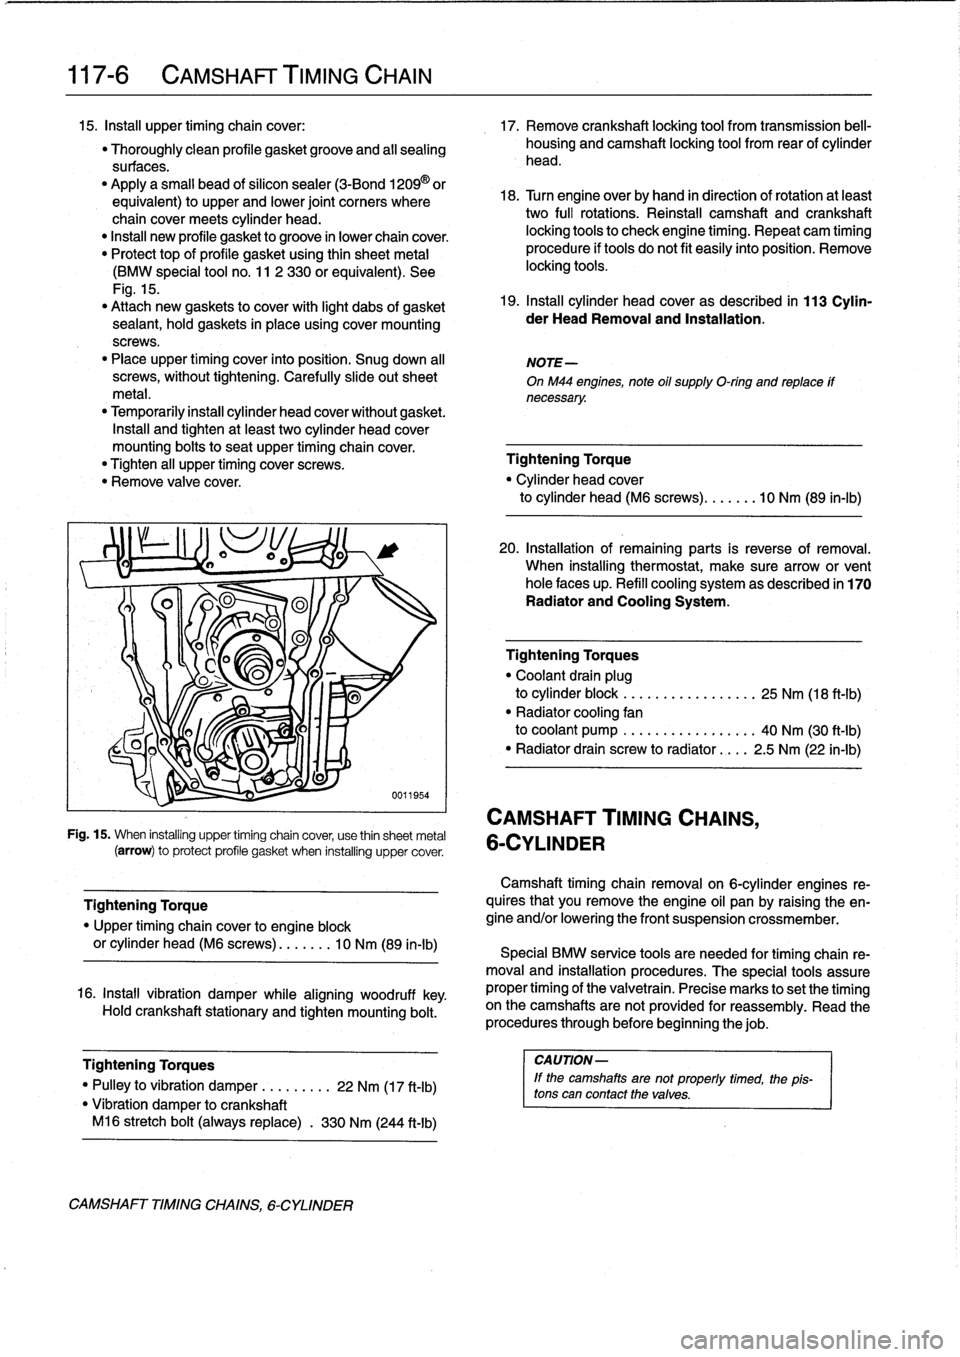 BMW 323i 1993 E36 Workshop Manual 
117-
6

	

CAMSHAFT
TIMING
CHAIN

15
.
Insta¡¡
upper
timing
chaincover
:

	

17
.
Remove
crankshaft
locking
tool
from
transmission
bell-

"
Thoroughly
clean
profile
gasketgroove
and
all
sealing

	
